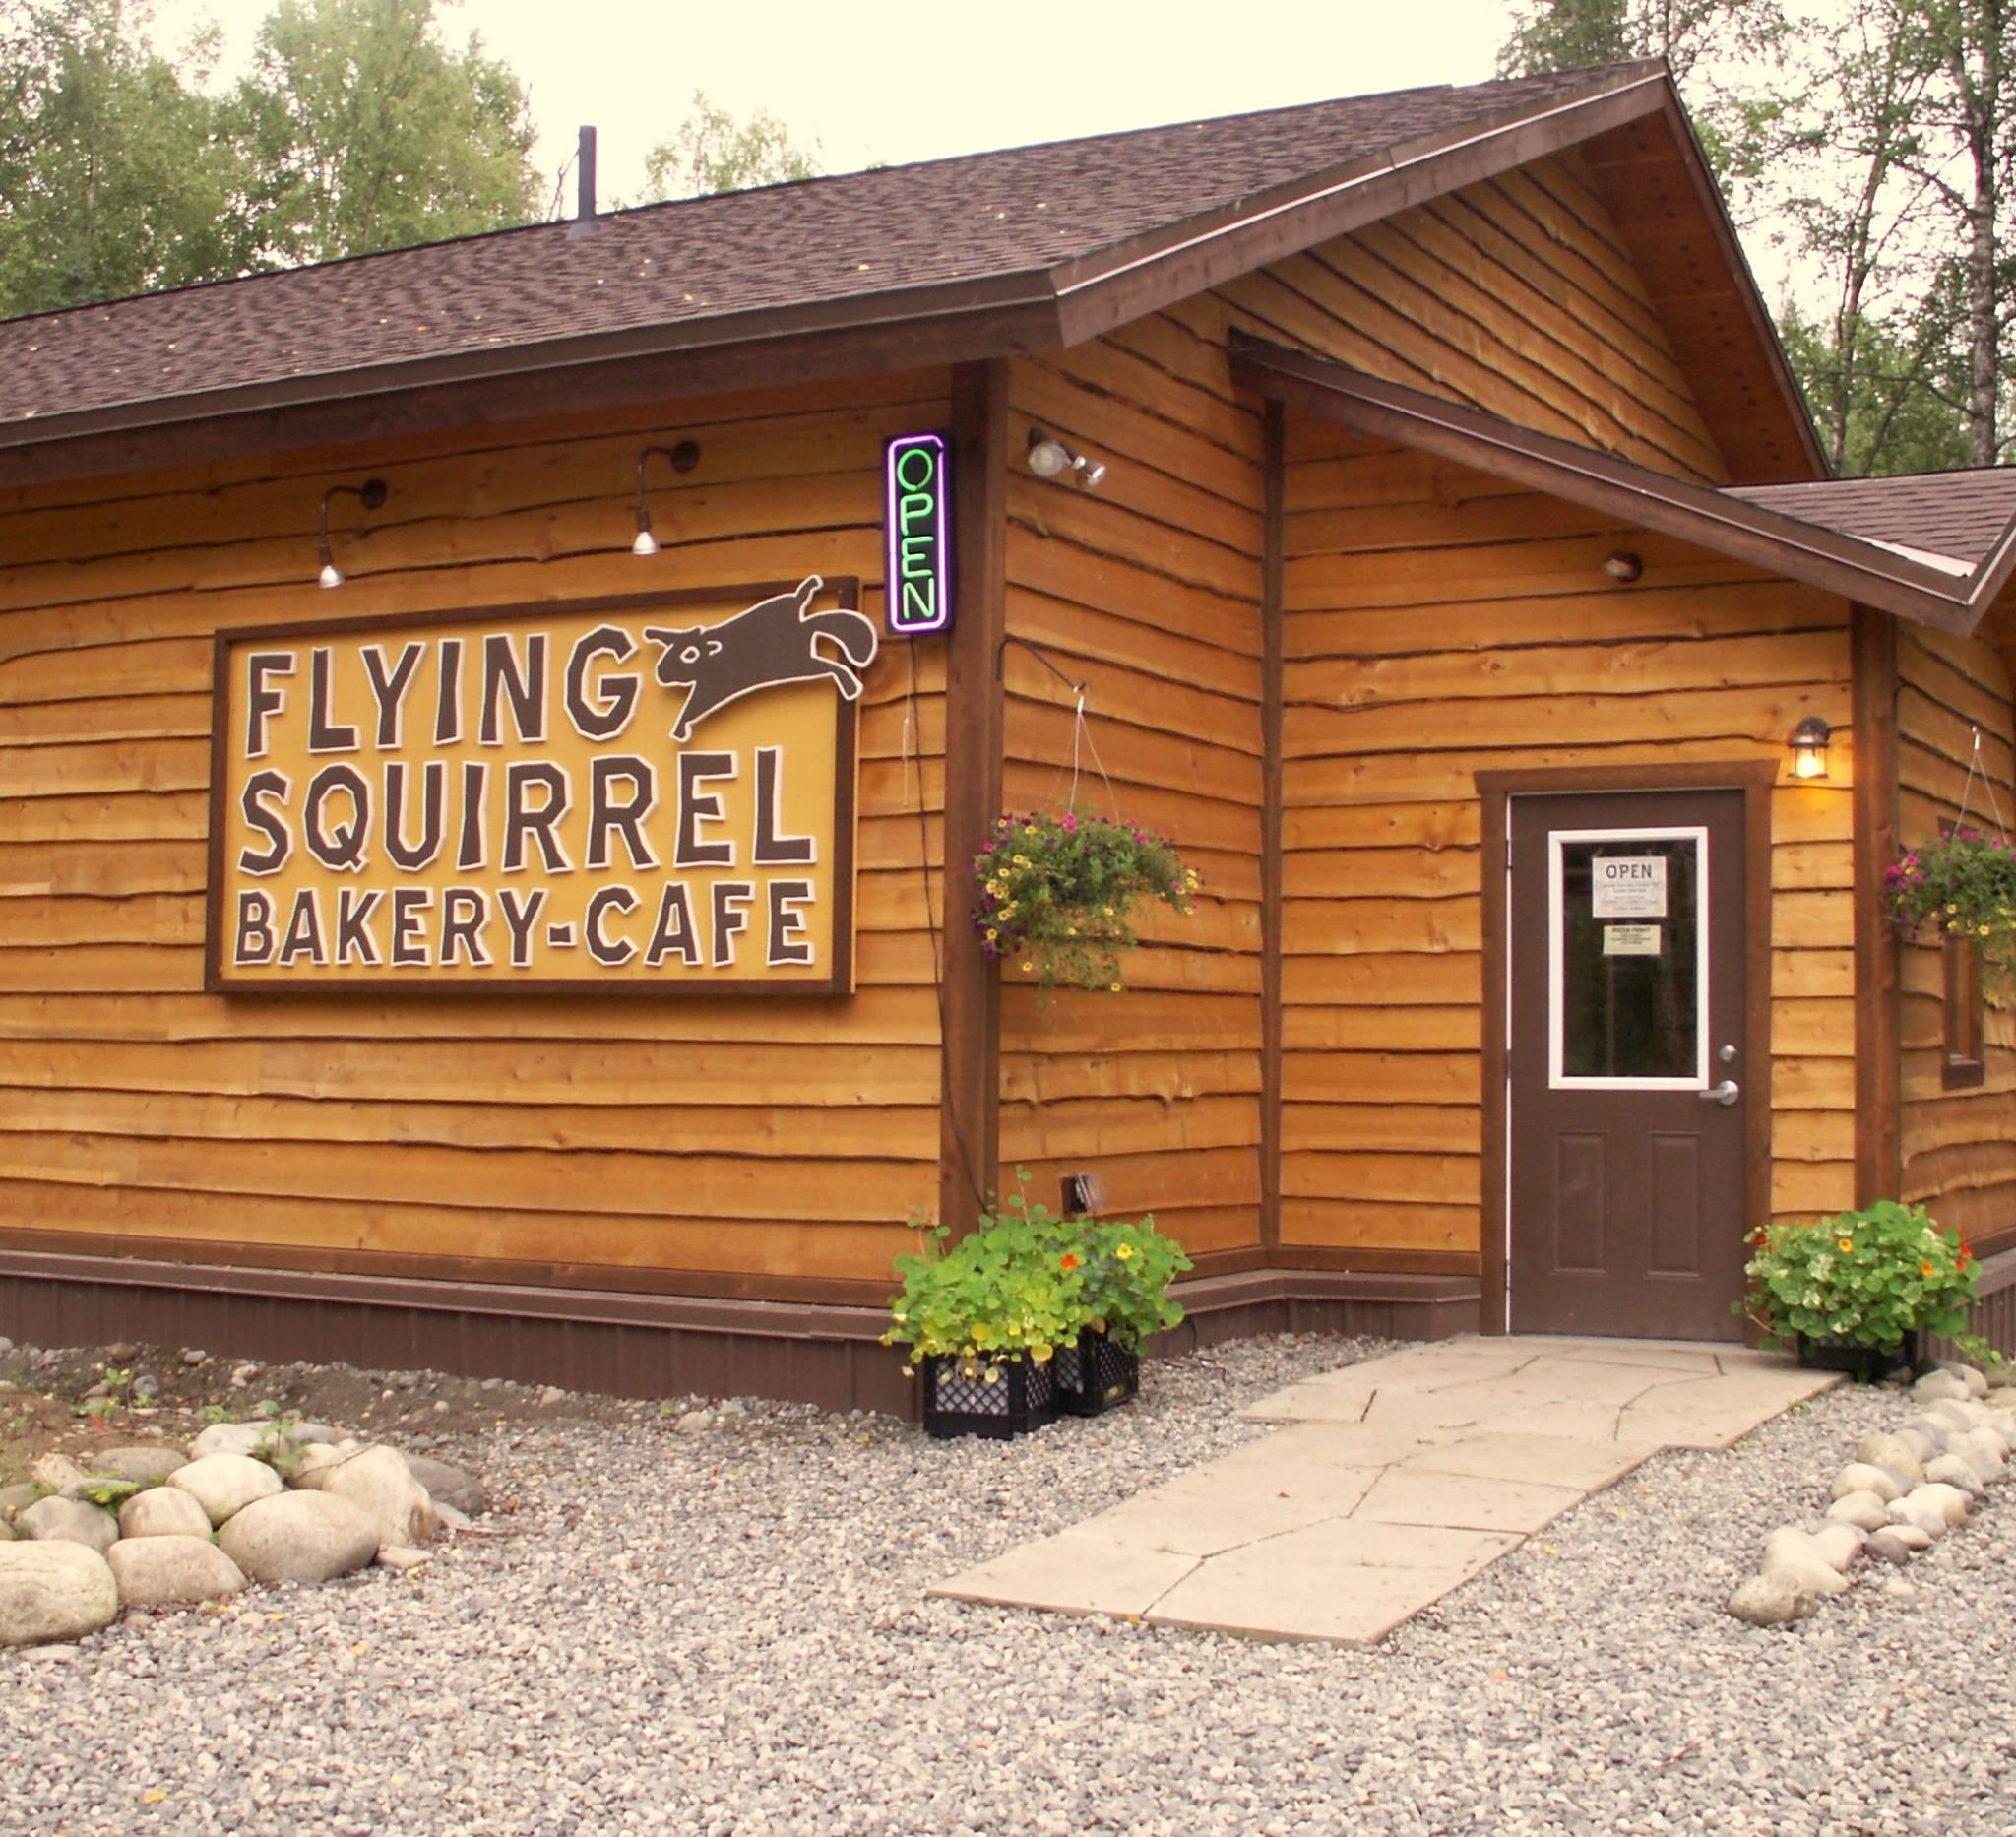 Pet Friendly Flying Squirrel Bakery Cafe